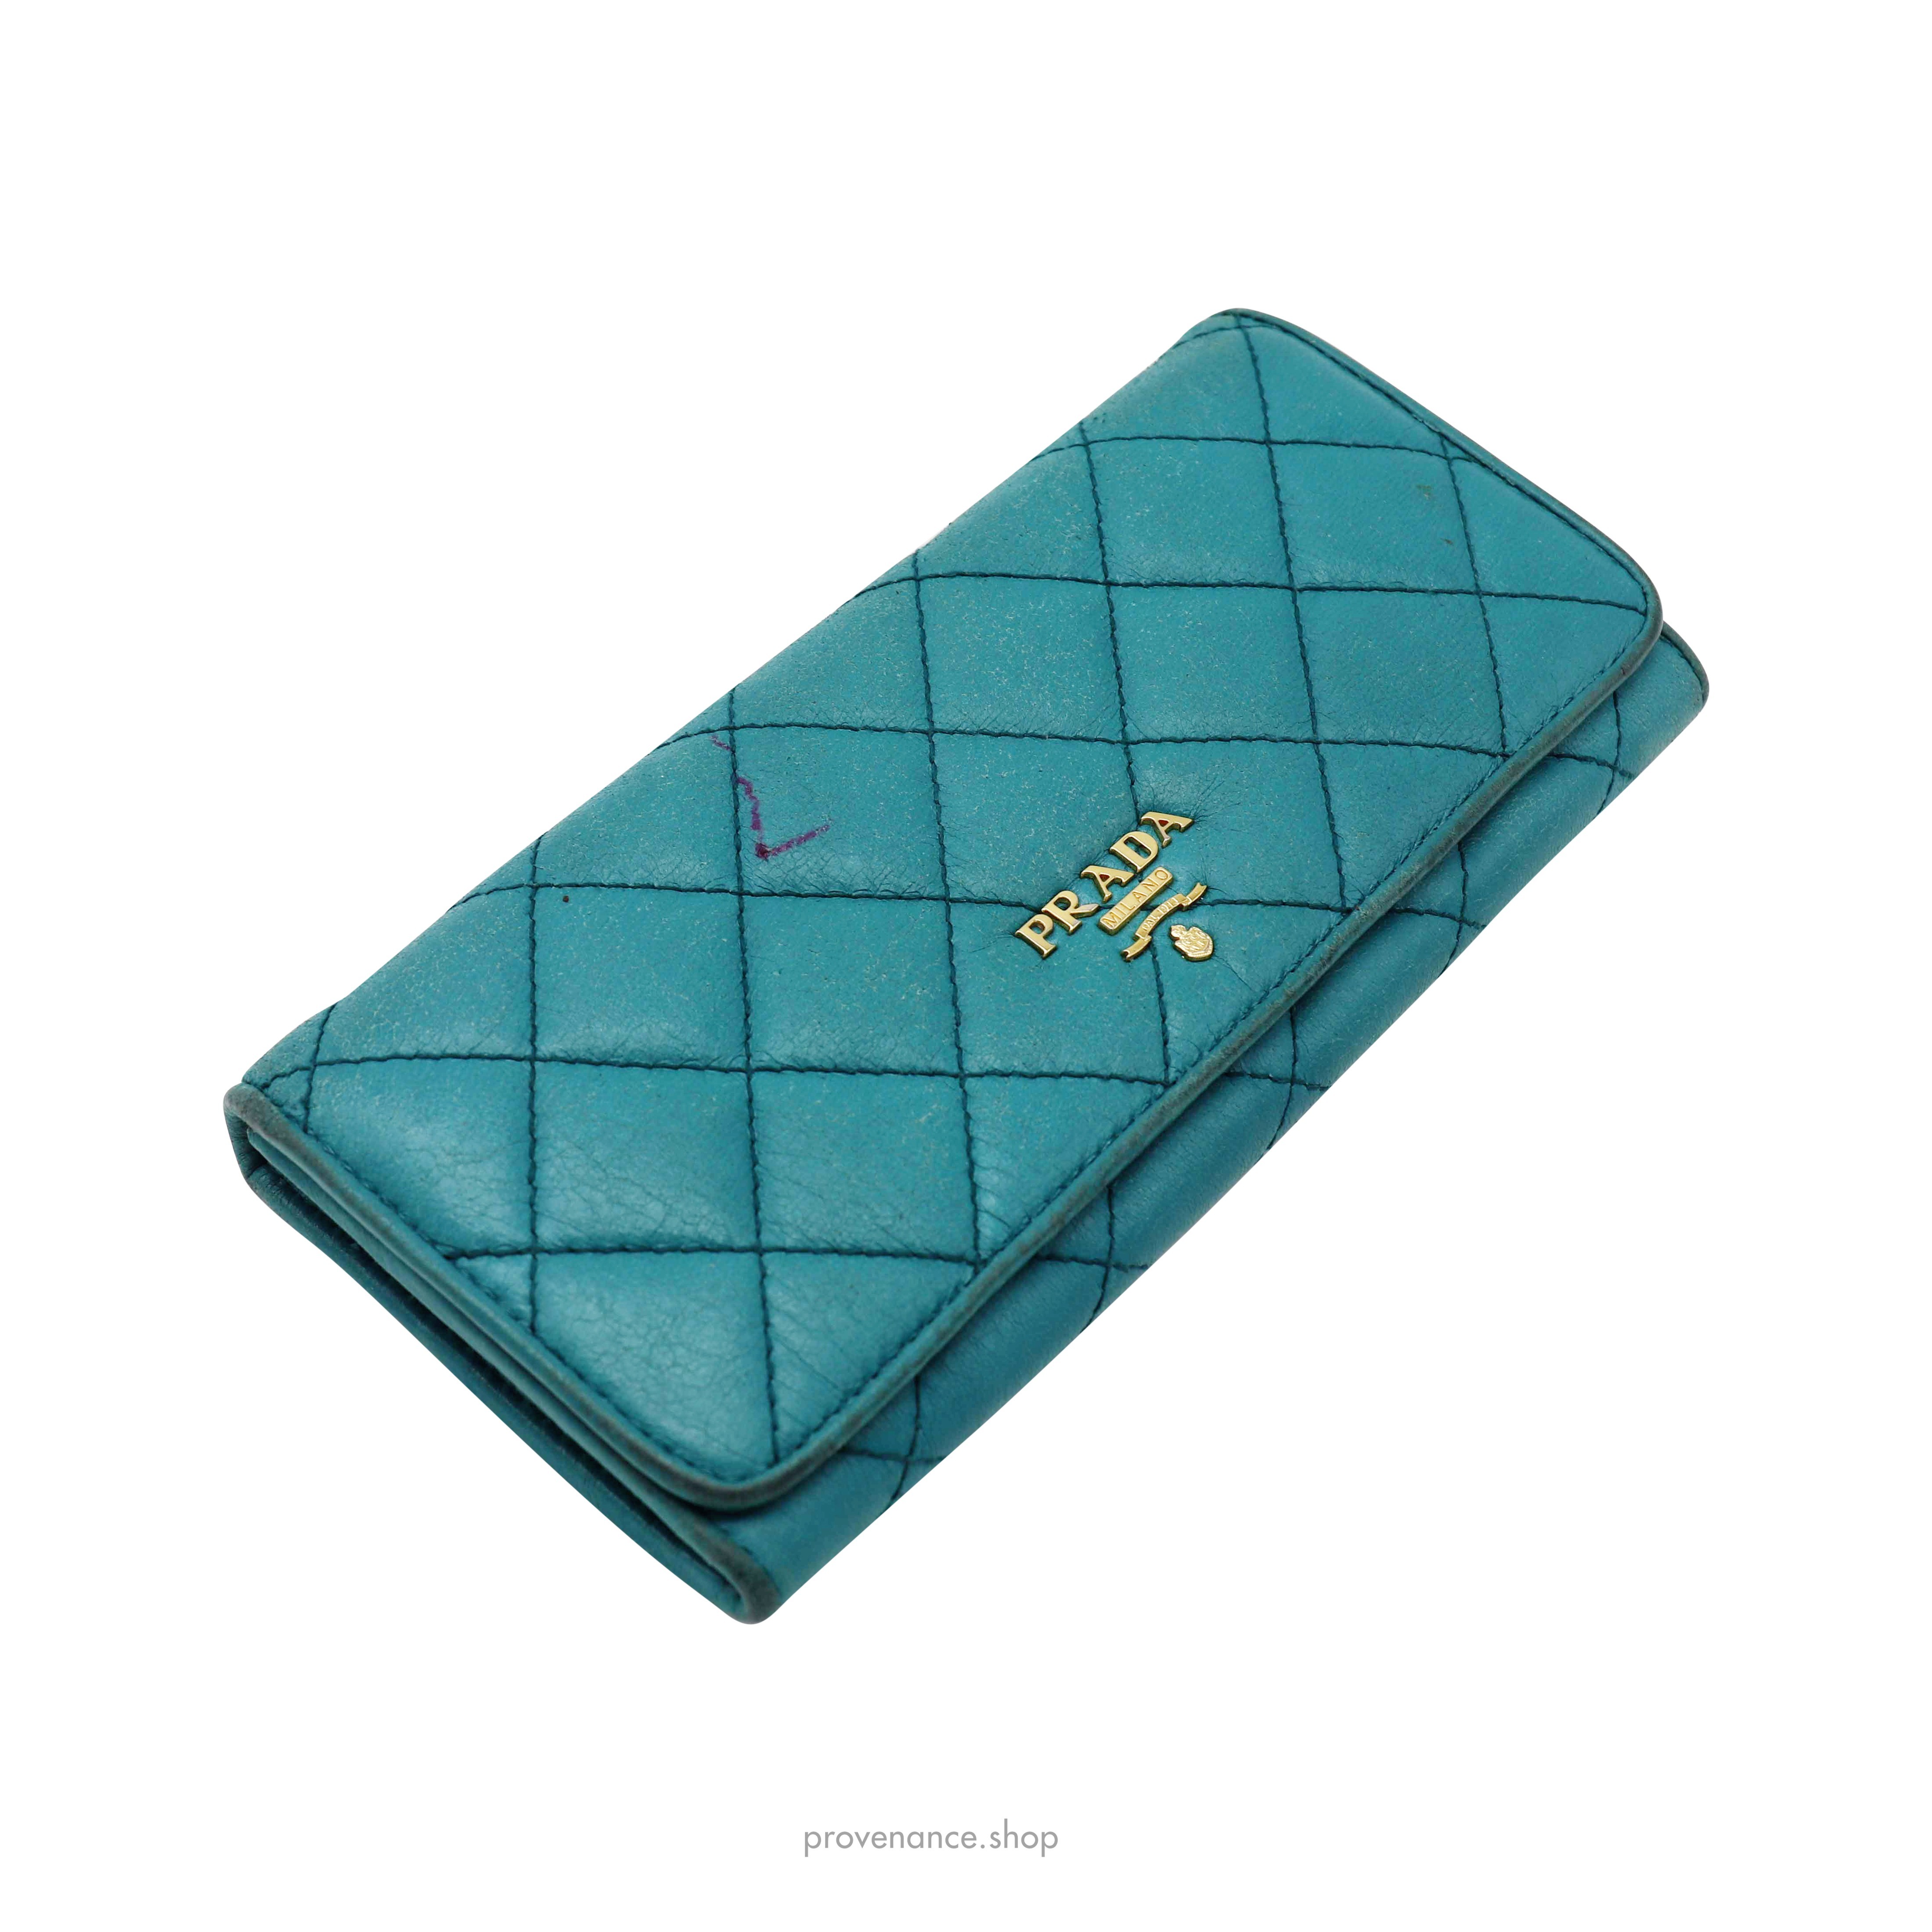 Prada Long Wallet - Quilted Blue Calfskin Leather - 3